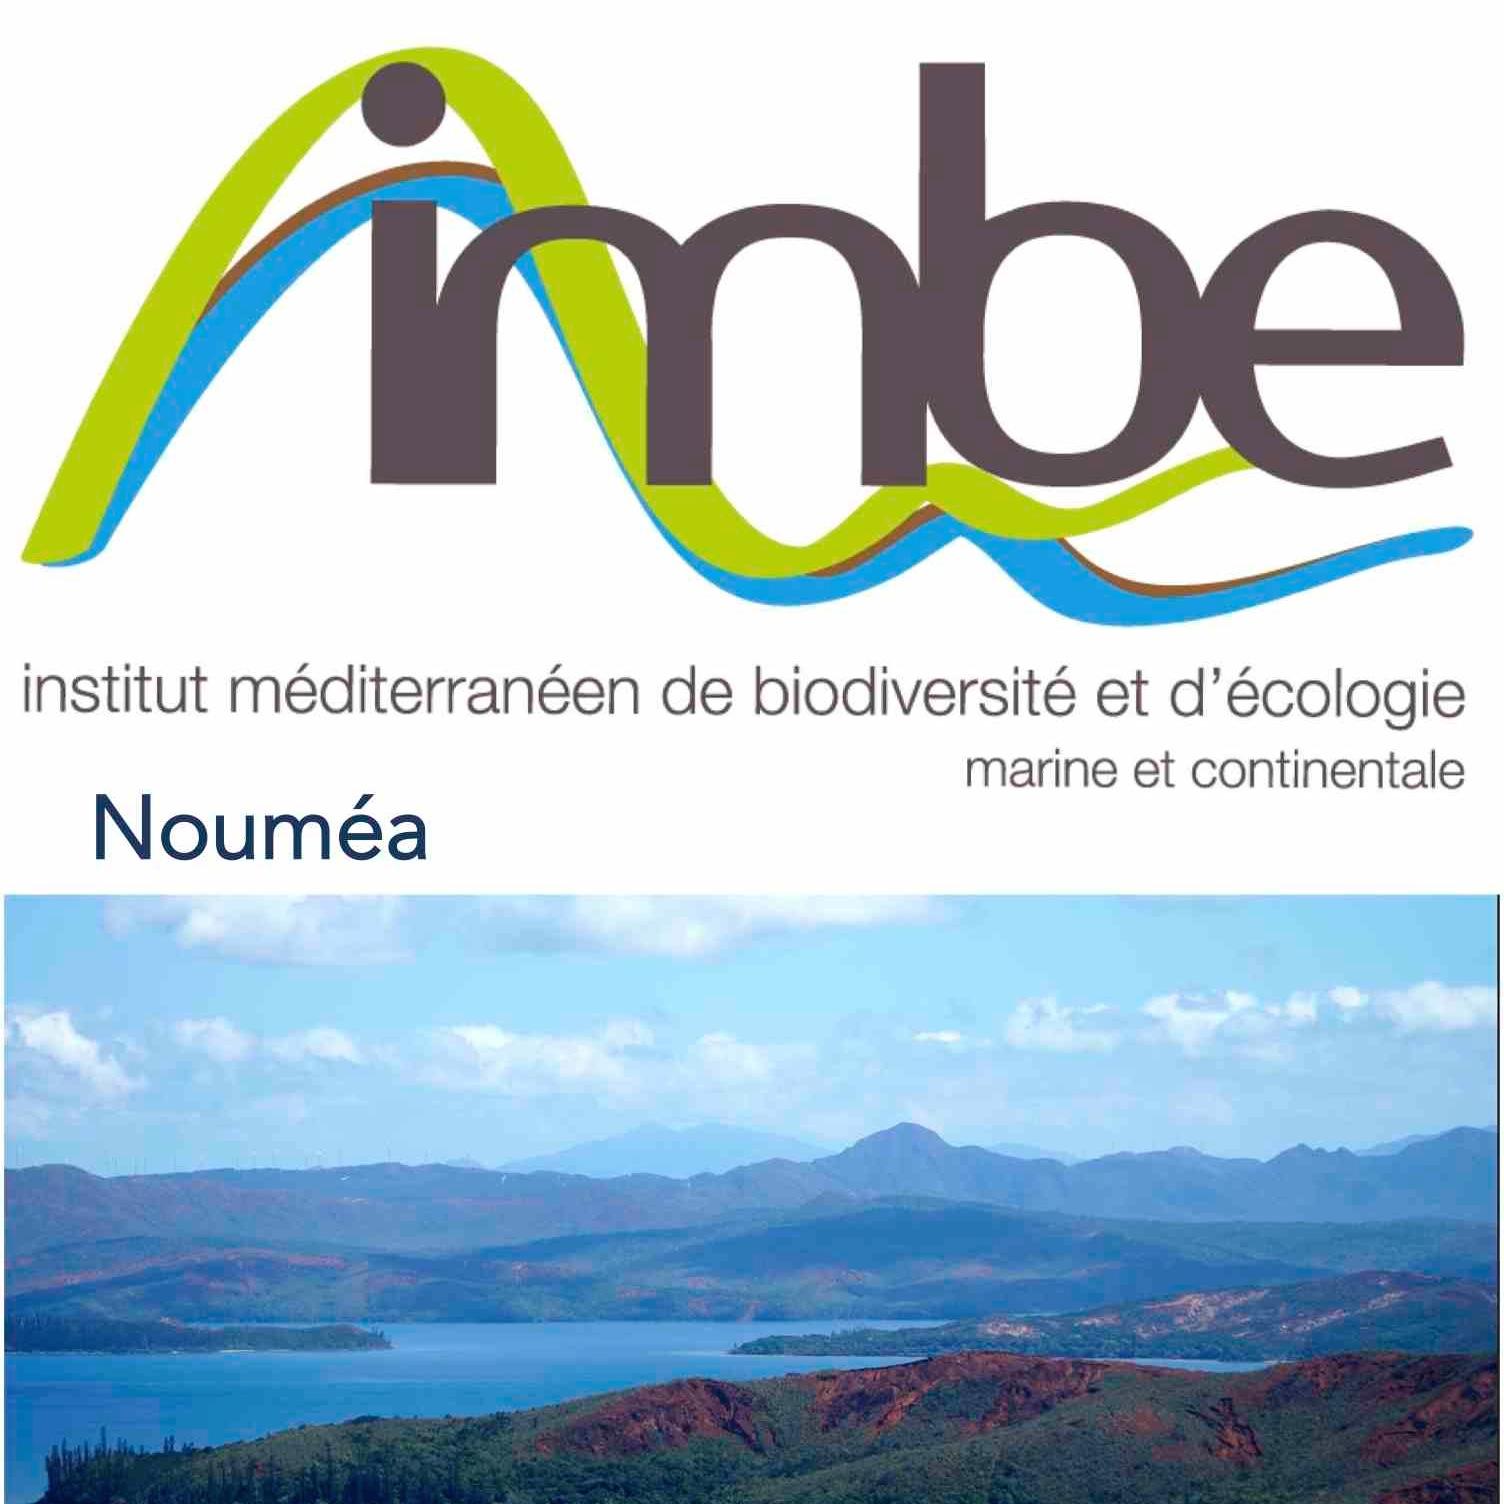 Pacific office of @imbe_marseille @ird_fr  Island ecol., invasion biol. and conservat° of Pacific isl. Tweets express personal views not IMBE nor IRD